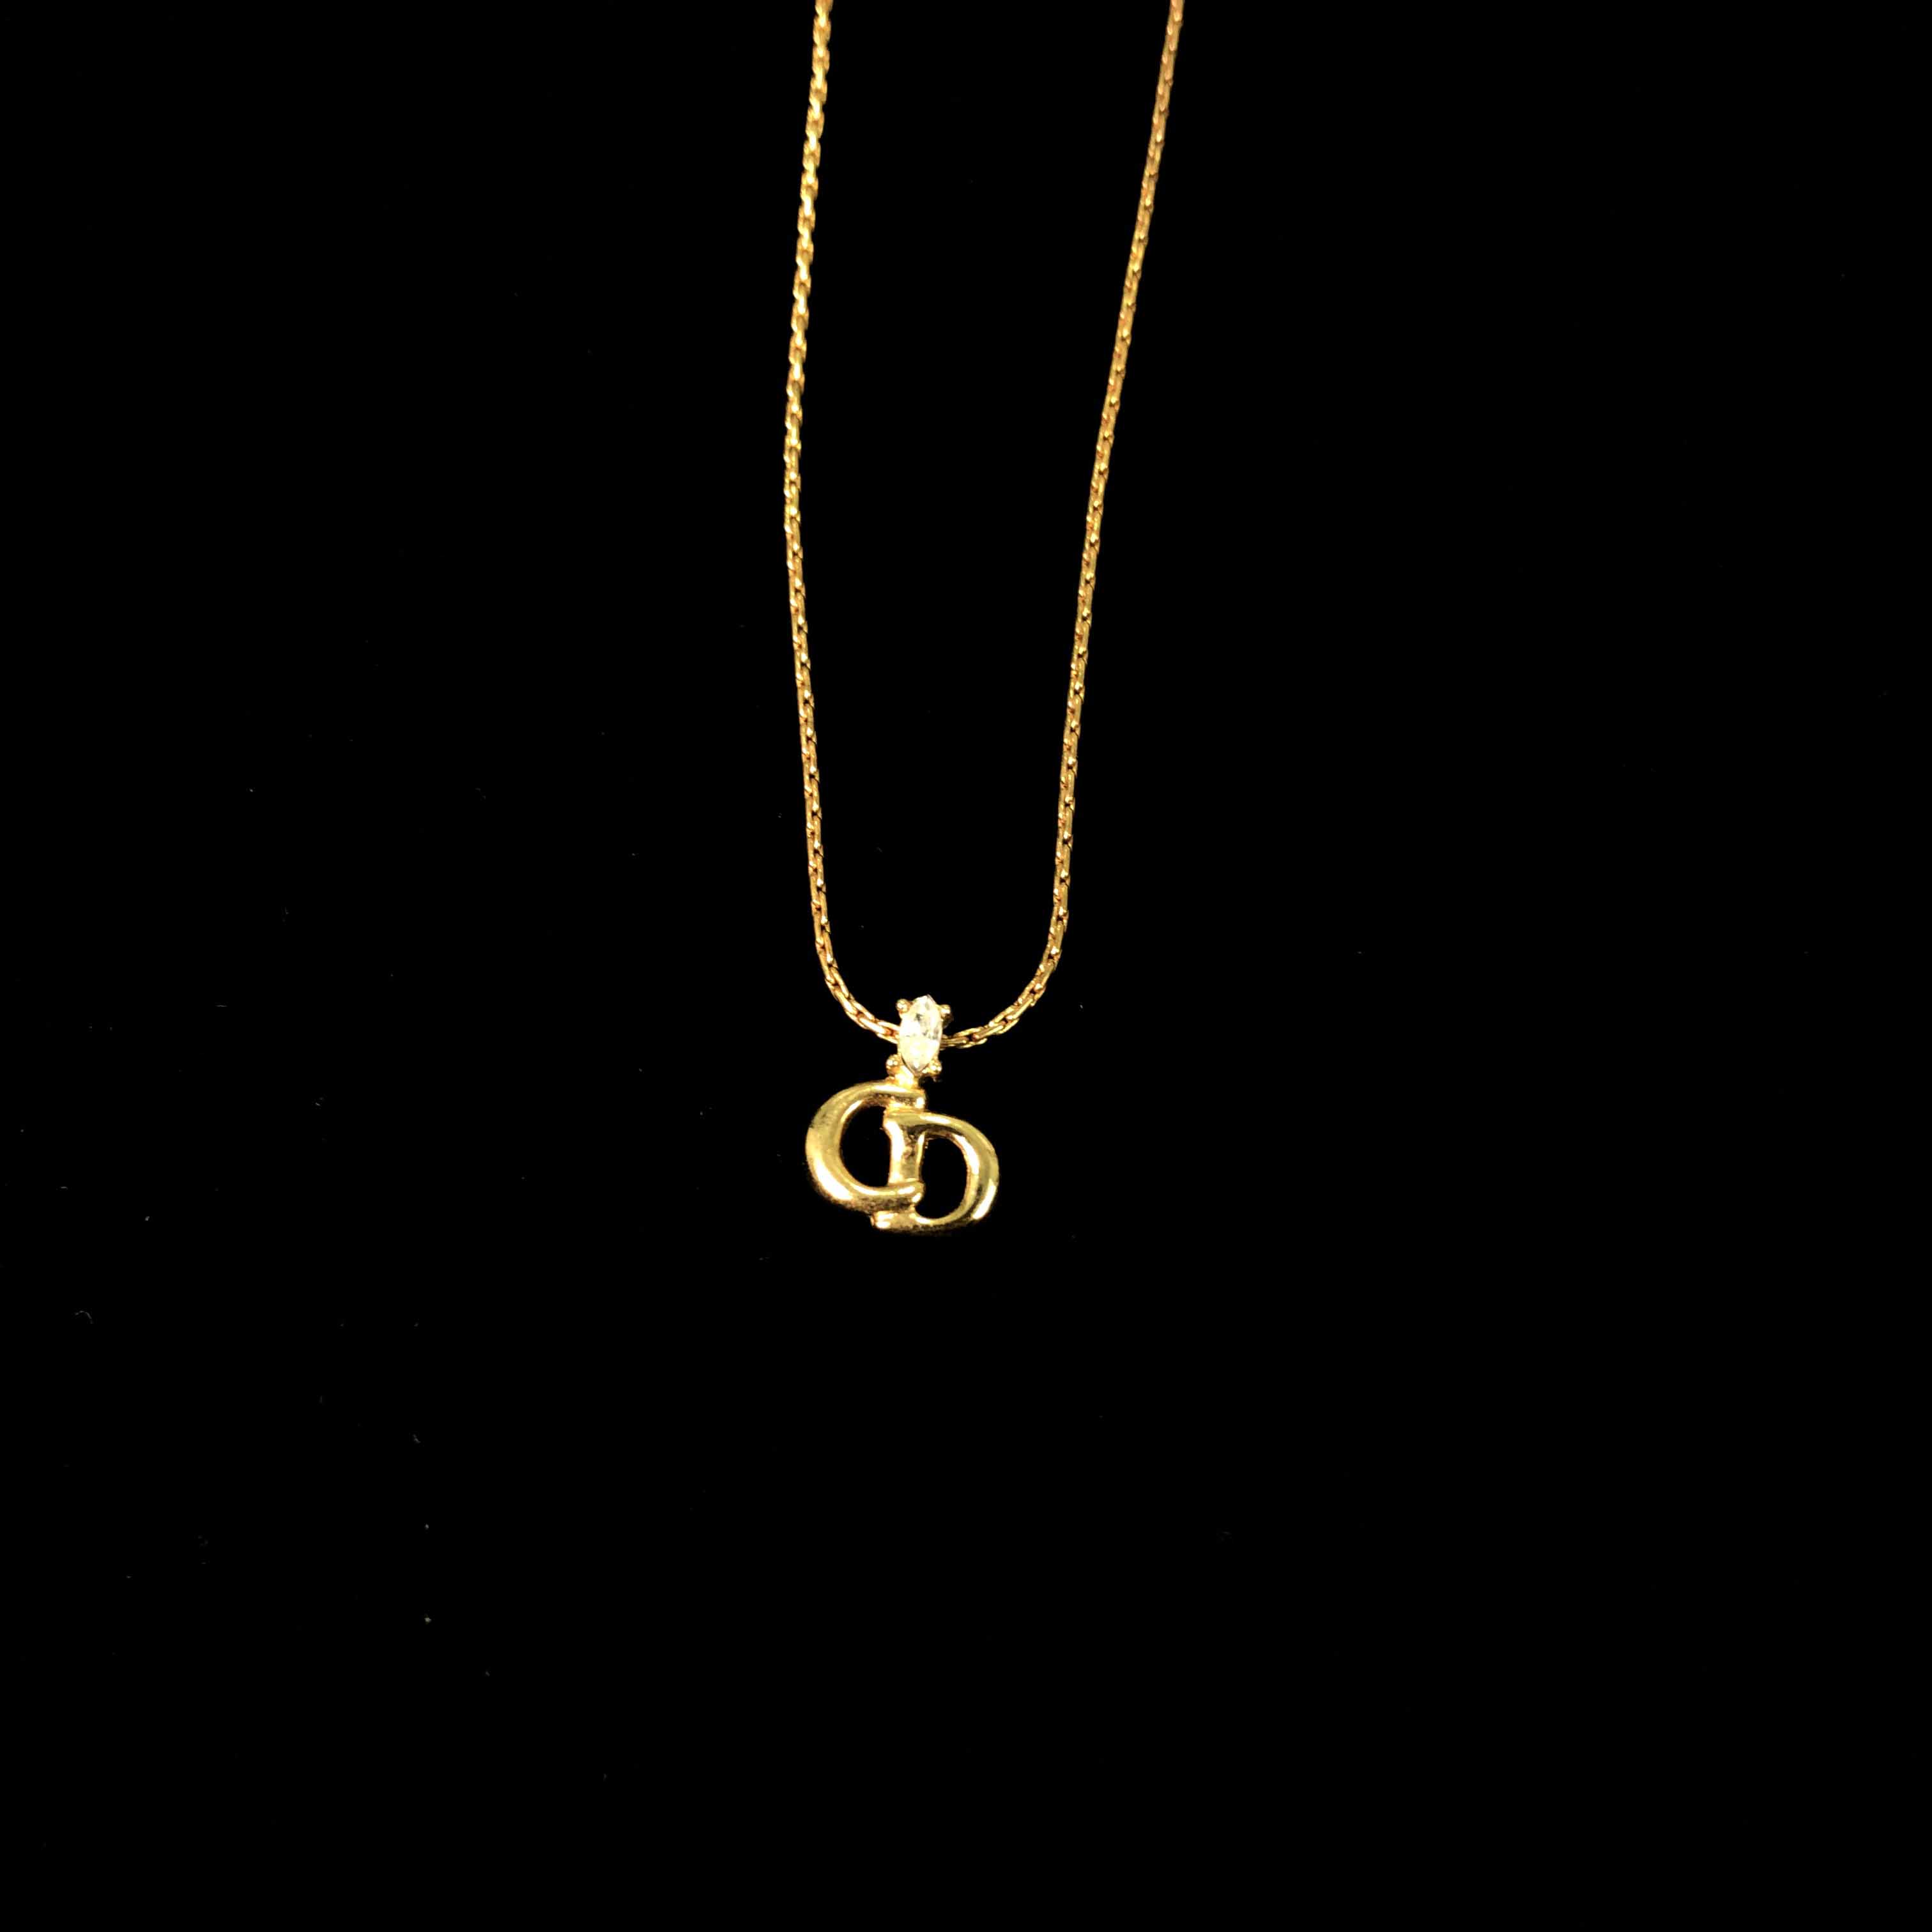 [Dior] CD Gold Necklace w/ Cubic - Size Free